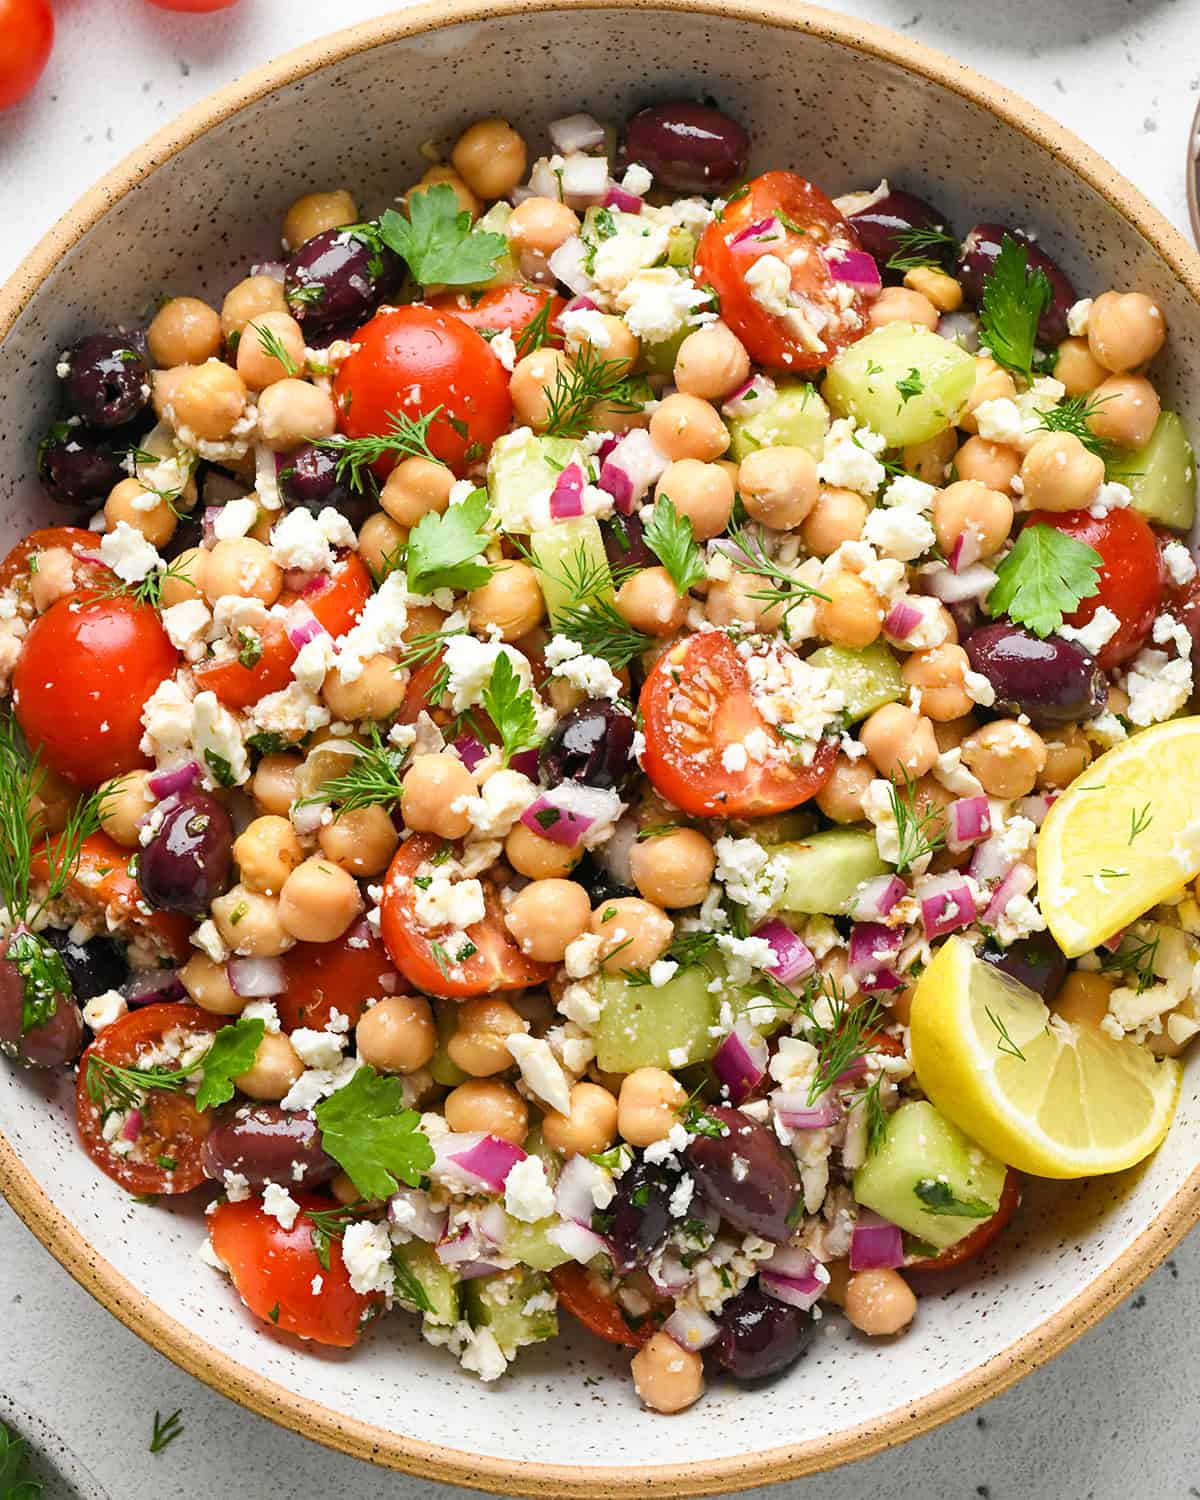 Mediterranean Chickpea Salad in a bowl garnished with dill and parsley